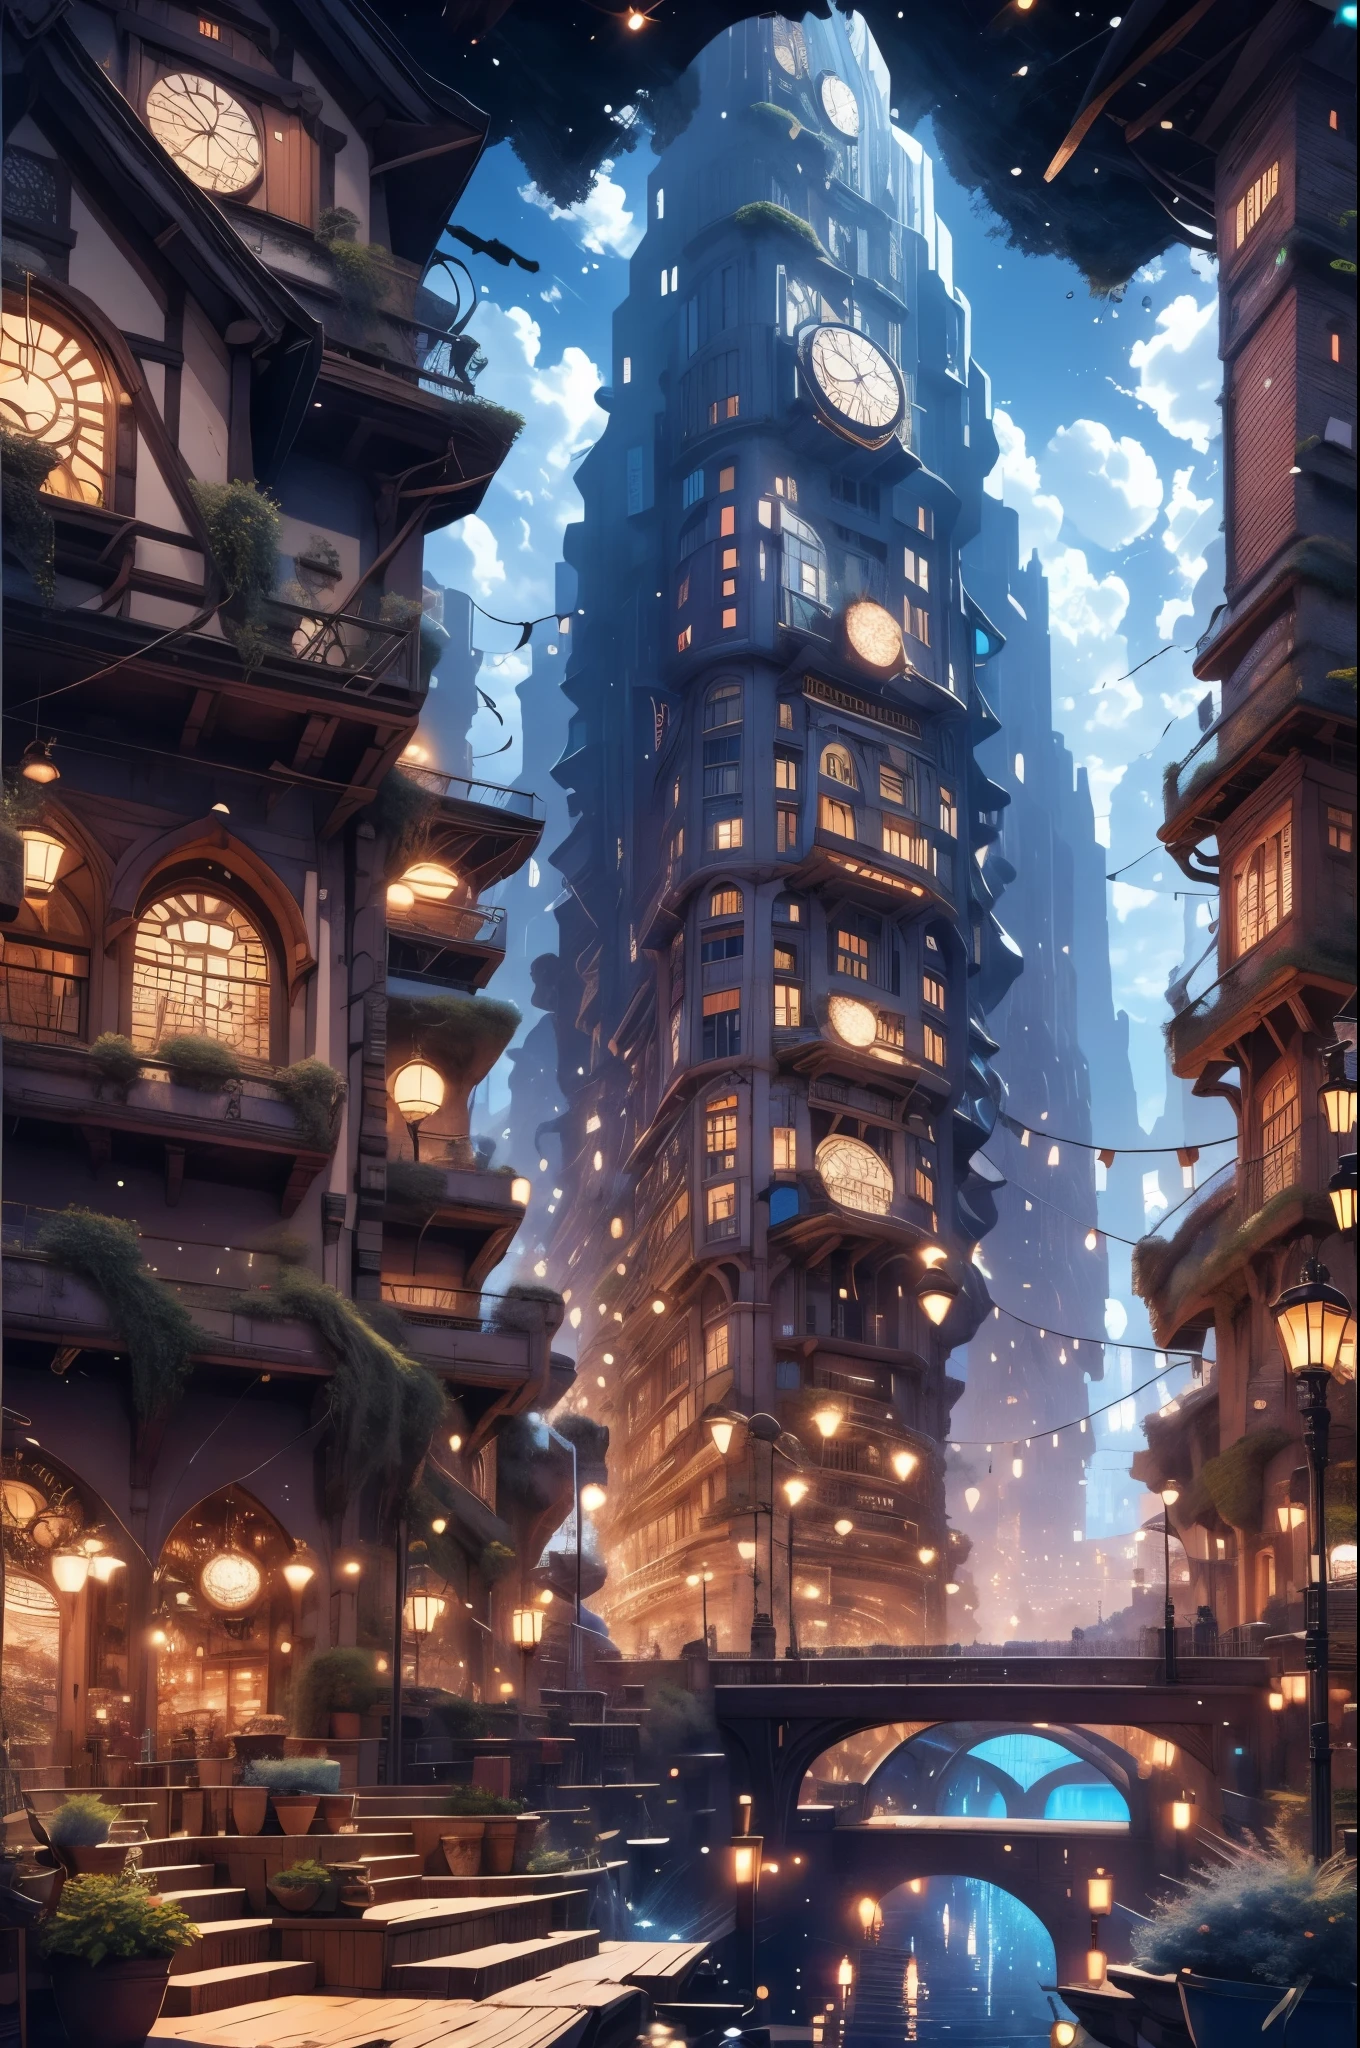 A city where the buildings are giant puzzles that rearrange themselves every night. Masterpiece, insane artwork, unique image aidma-niji, niji 